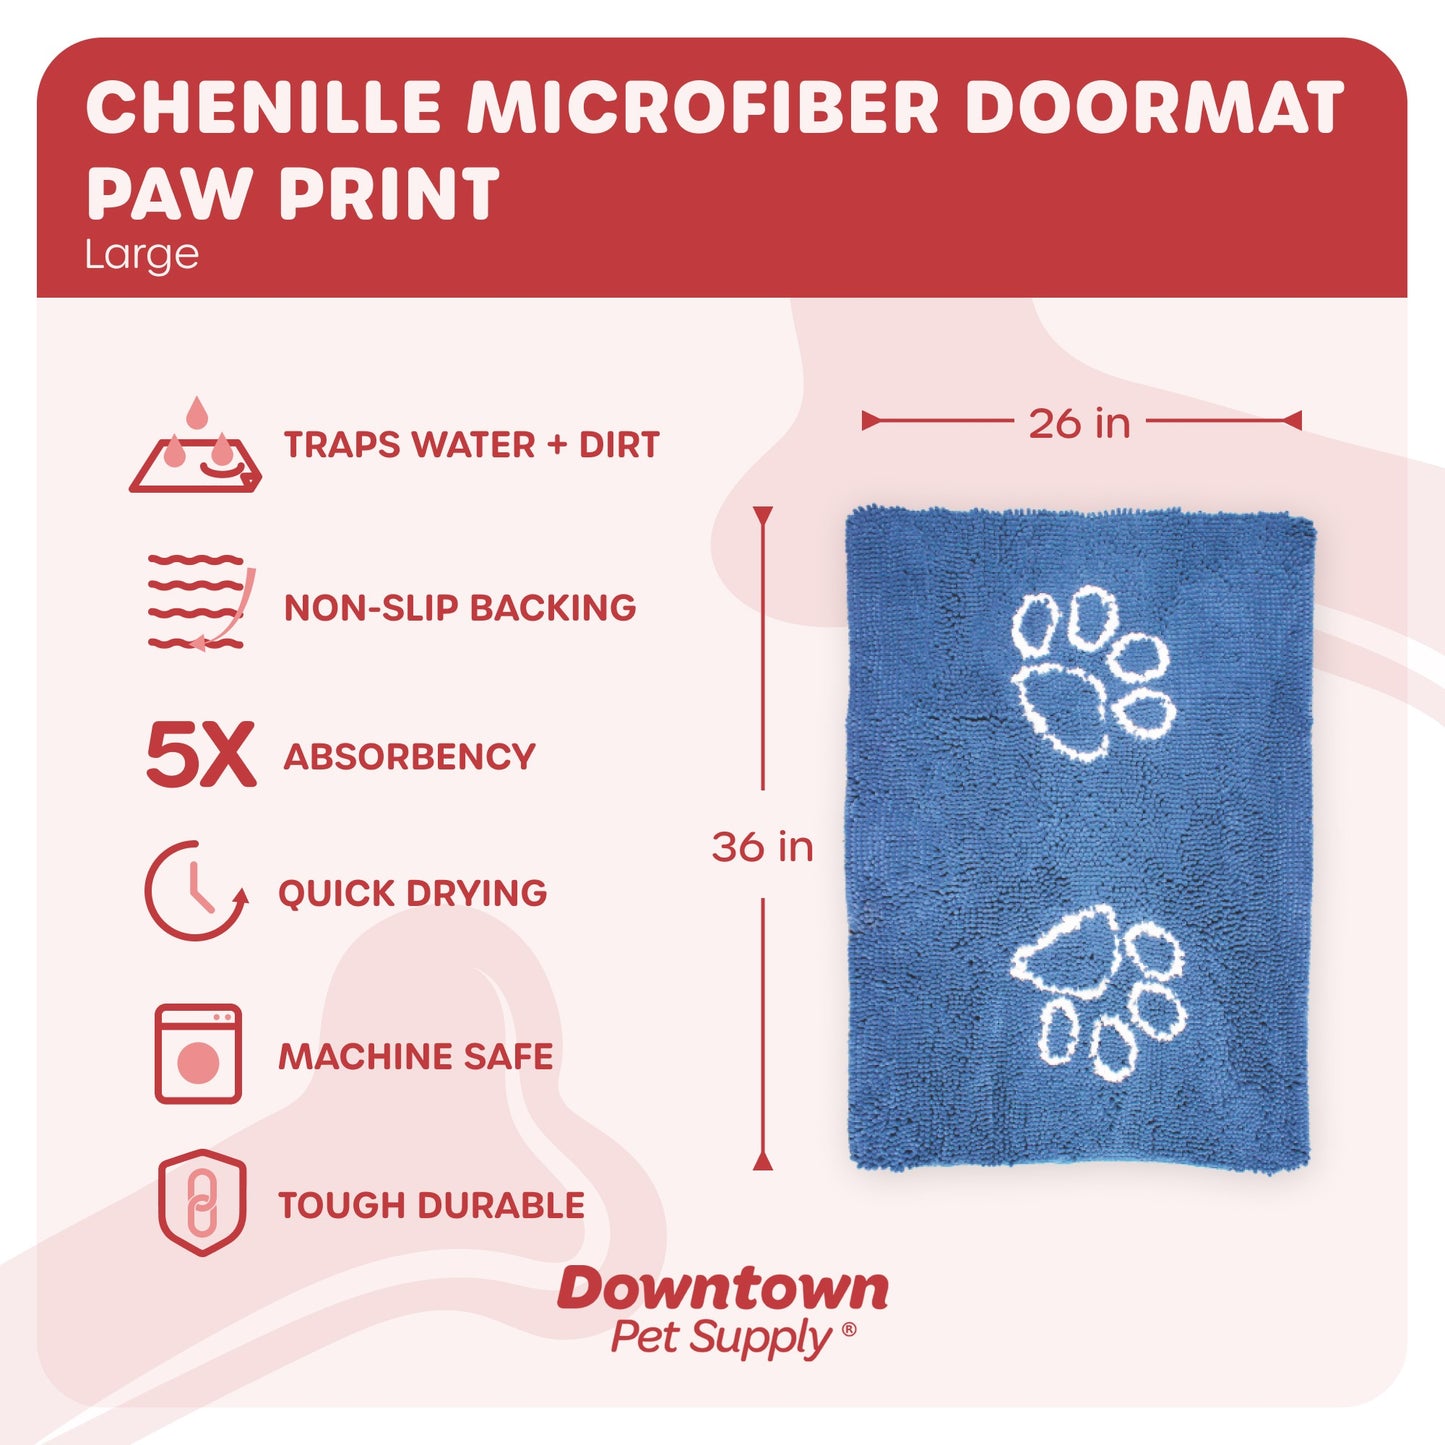 My Doggy Place - Ultra Absorbent Microfiber Dog Pet Door Mat, Durable, Quick Drying, Washable, Prevent Mud Dirt, Keep Your House Clean (Paw Print Design)